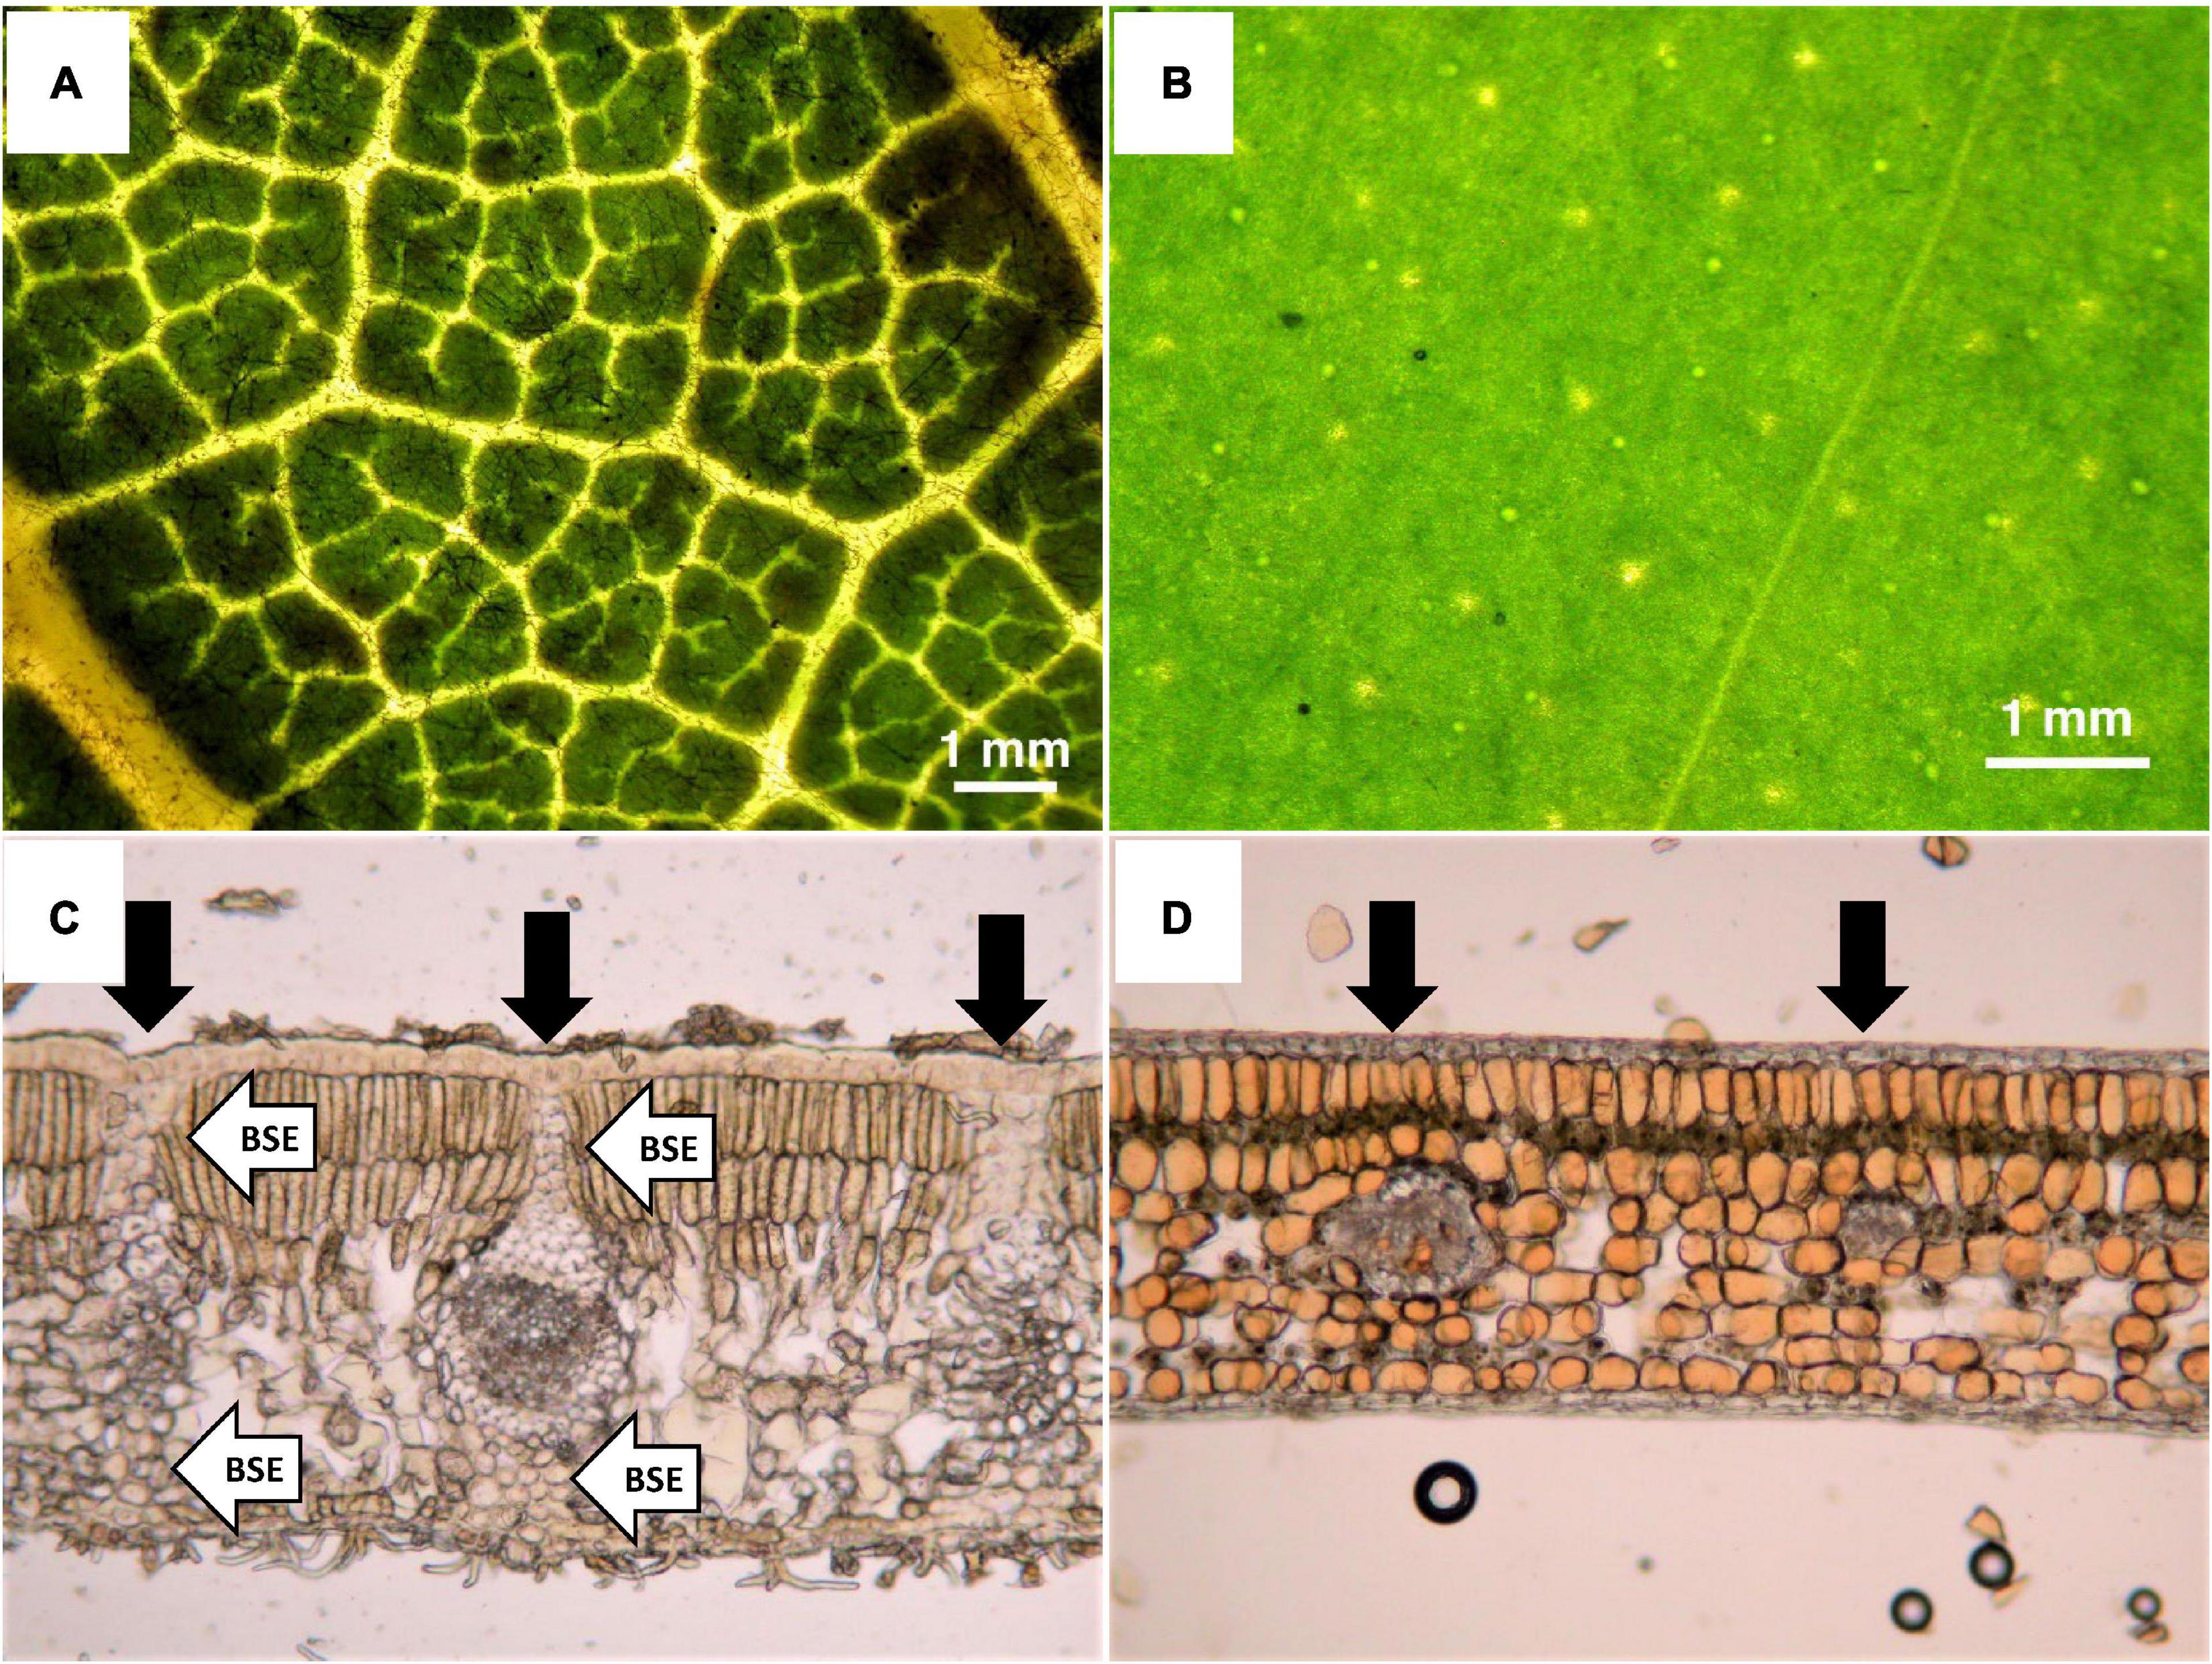 Frontiers | Leaf toughness increases with tree height and is